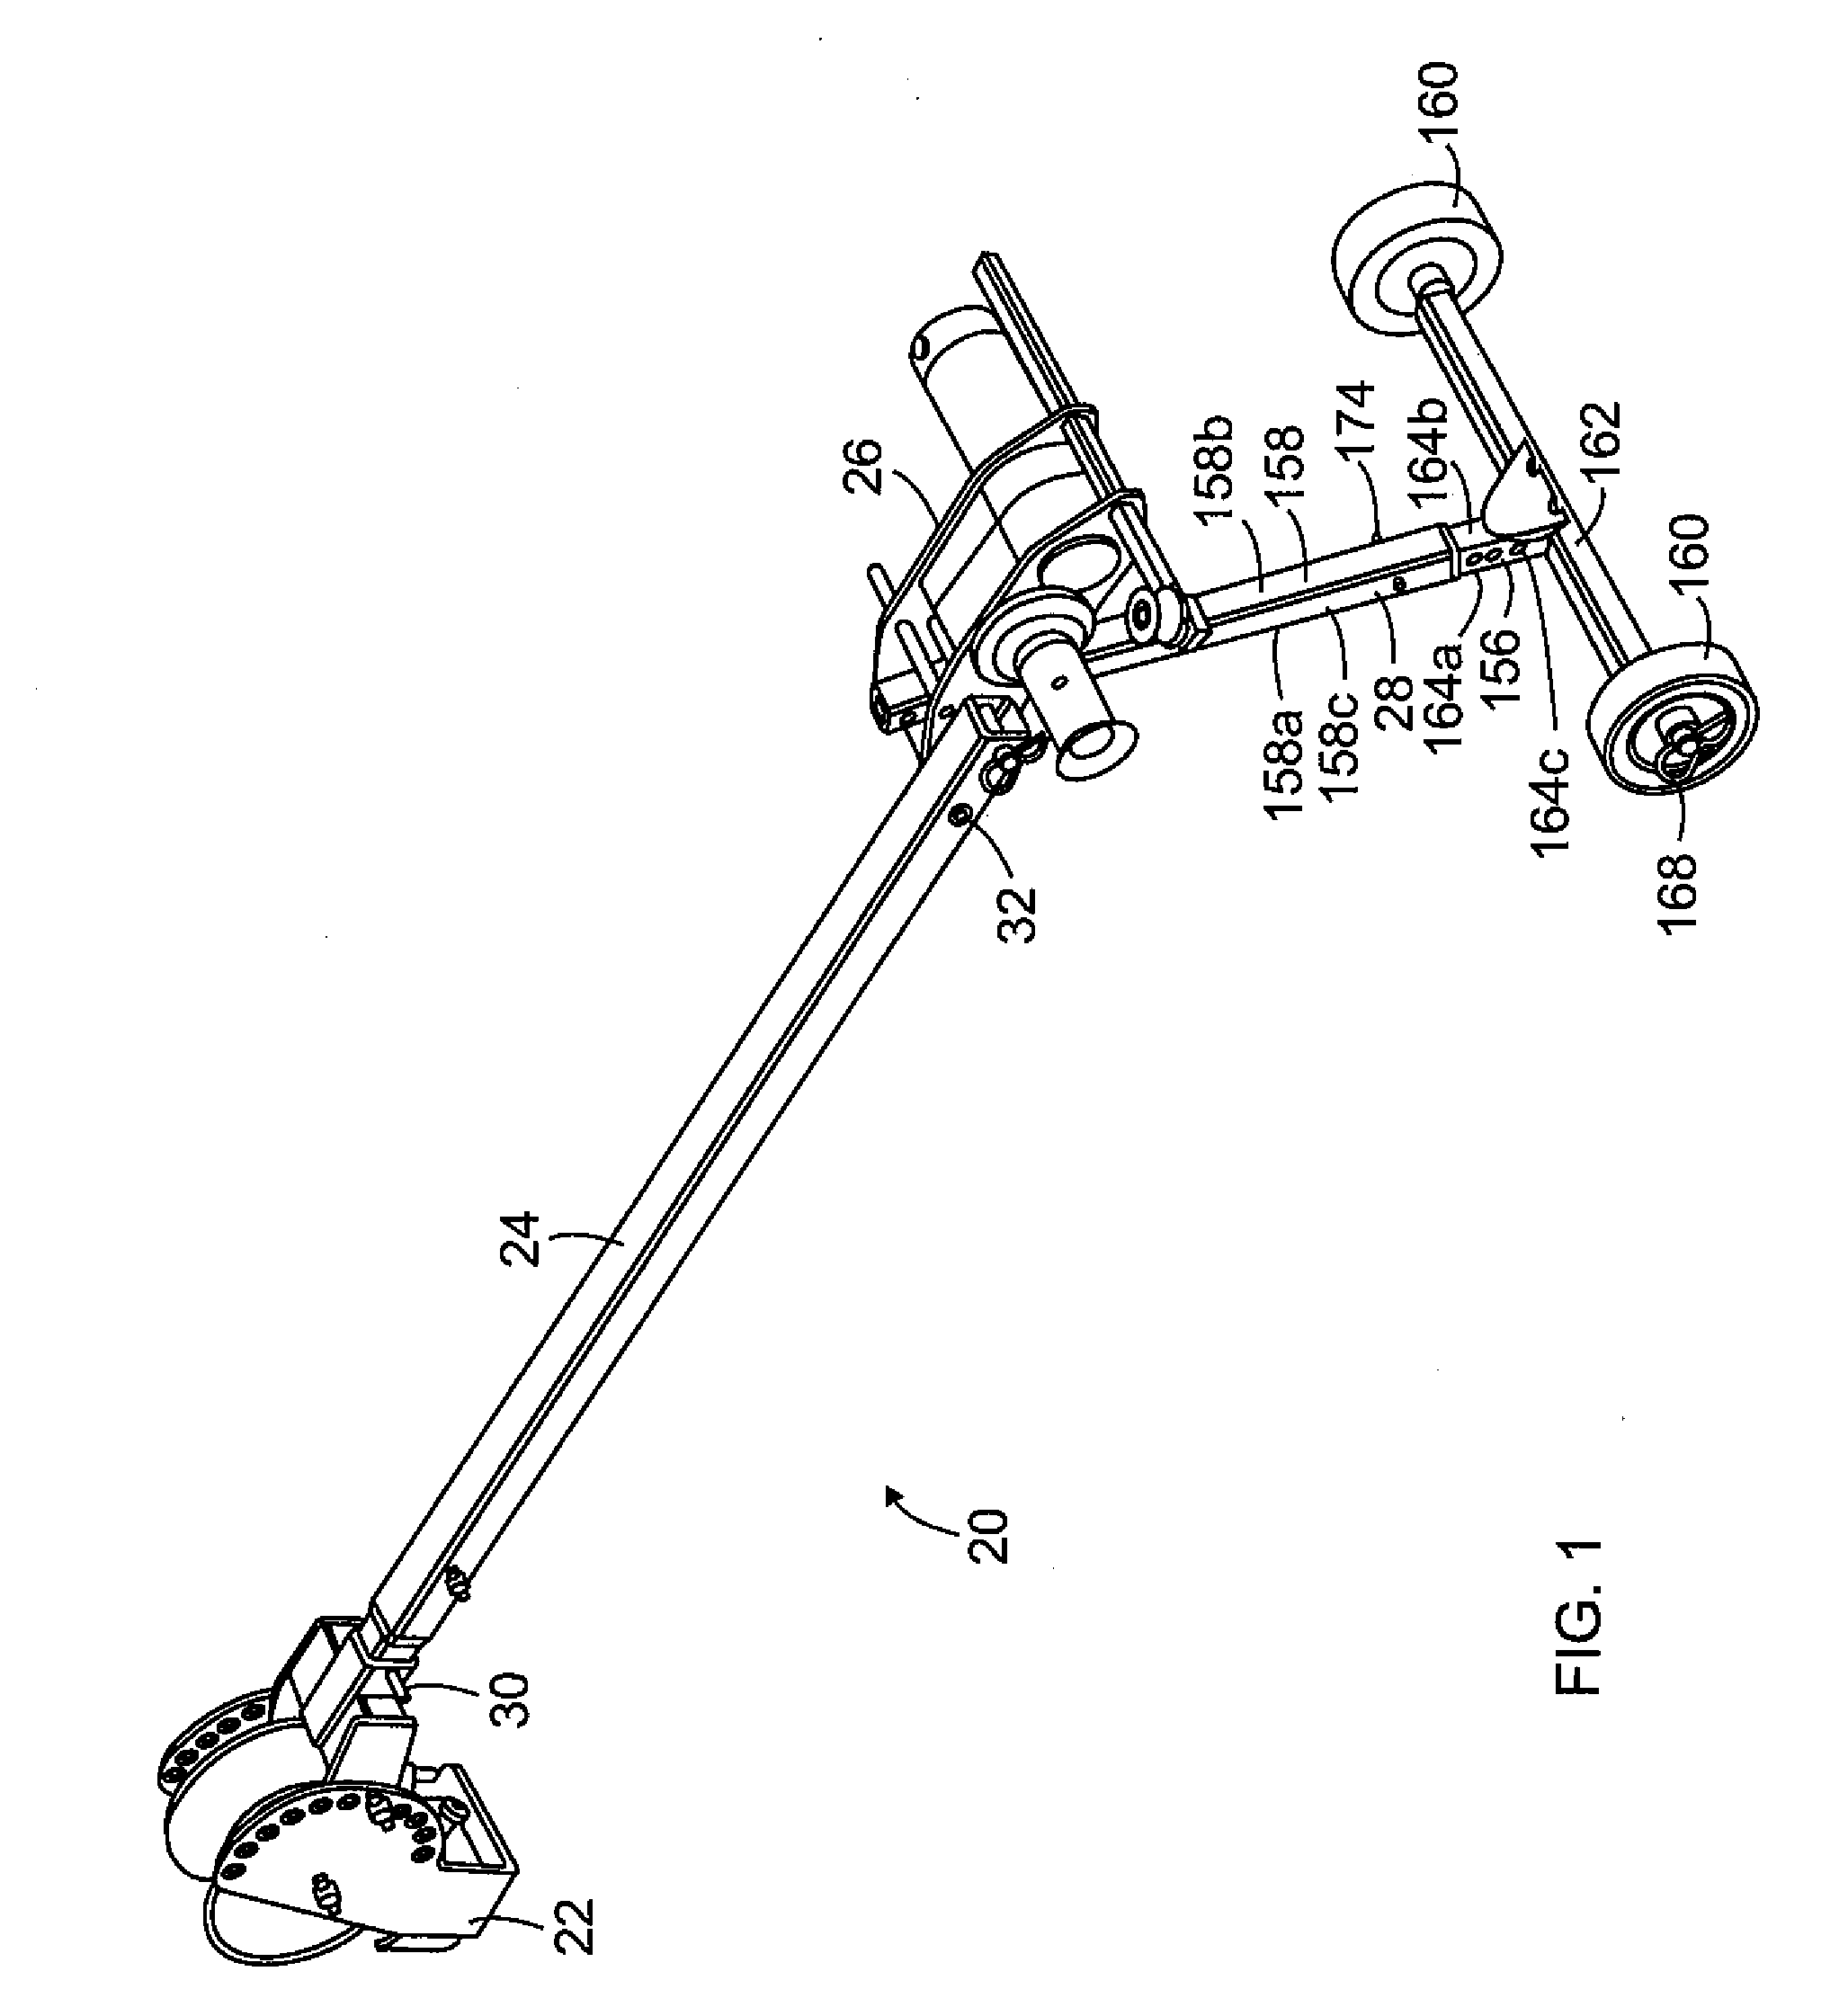 Cable puller with pivot adjuster for converting between upward and downward cable pulling